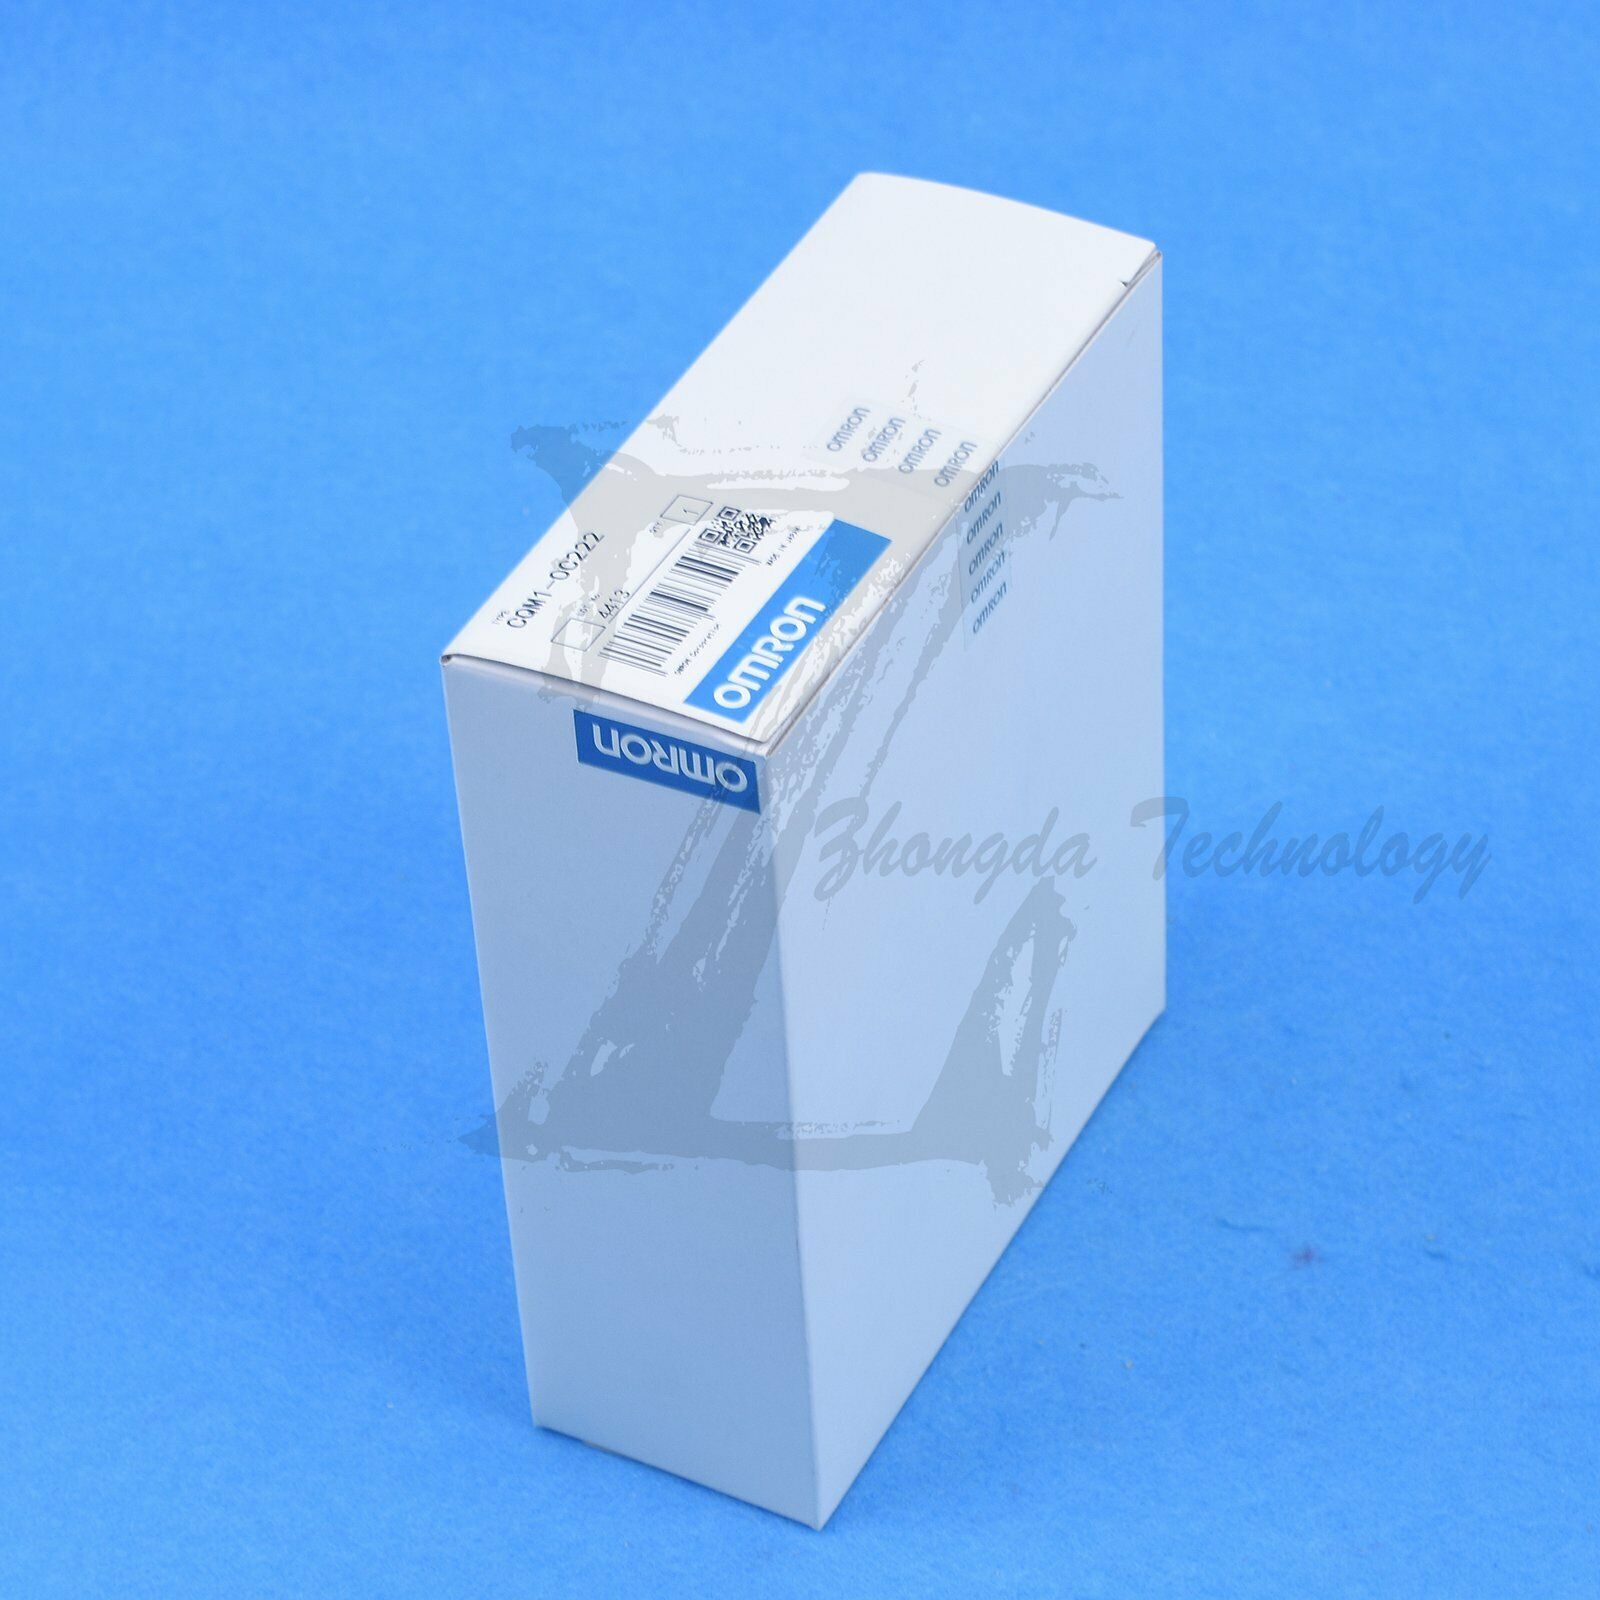 1pc new Omron CQM1-OC222 PLC module free shipping KOEED 101-200, 80%, import_2020_10_10_031751, Omron, Other